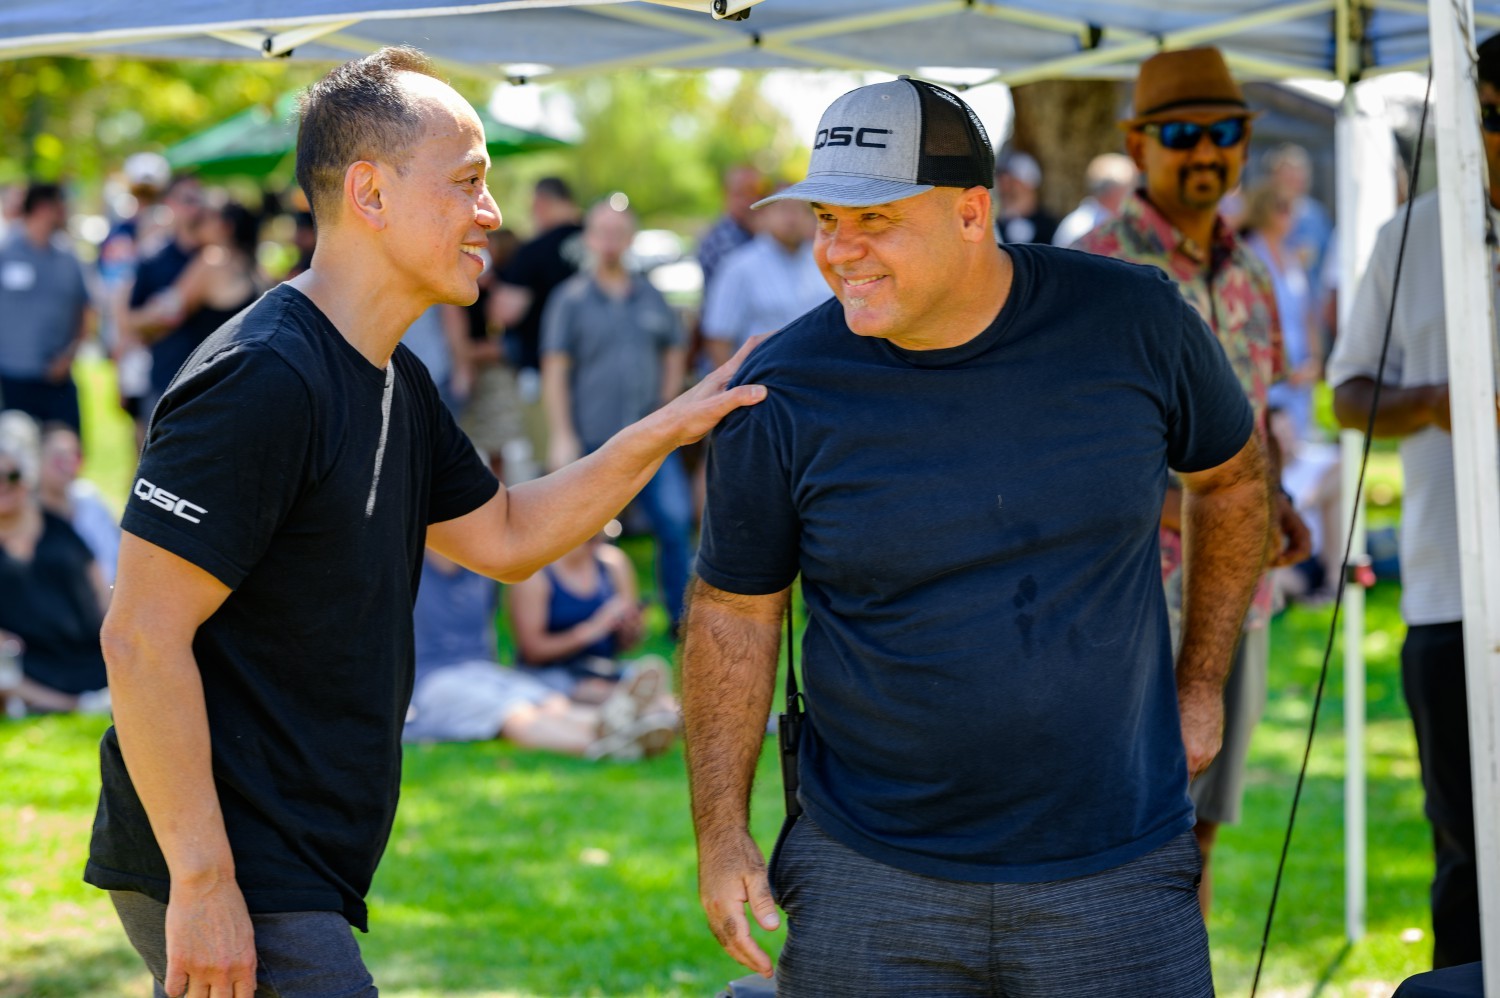 QSC's CEO connecting with employees at our company picnic.